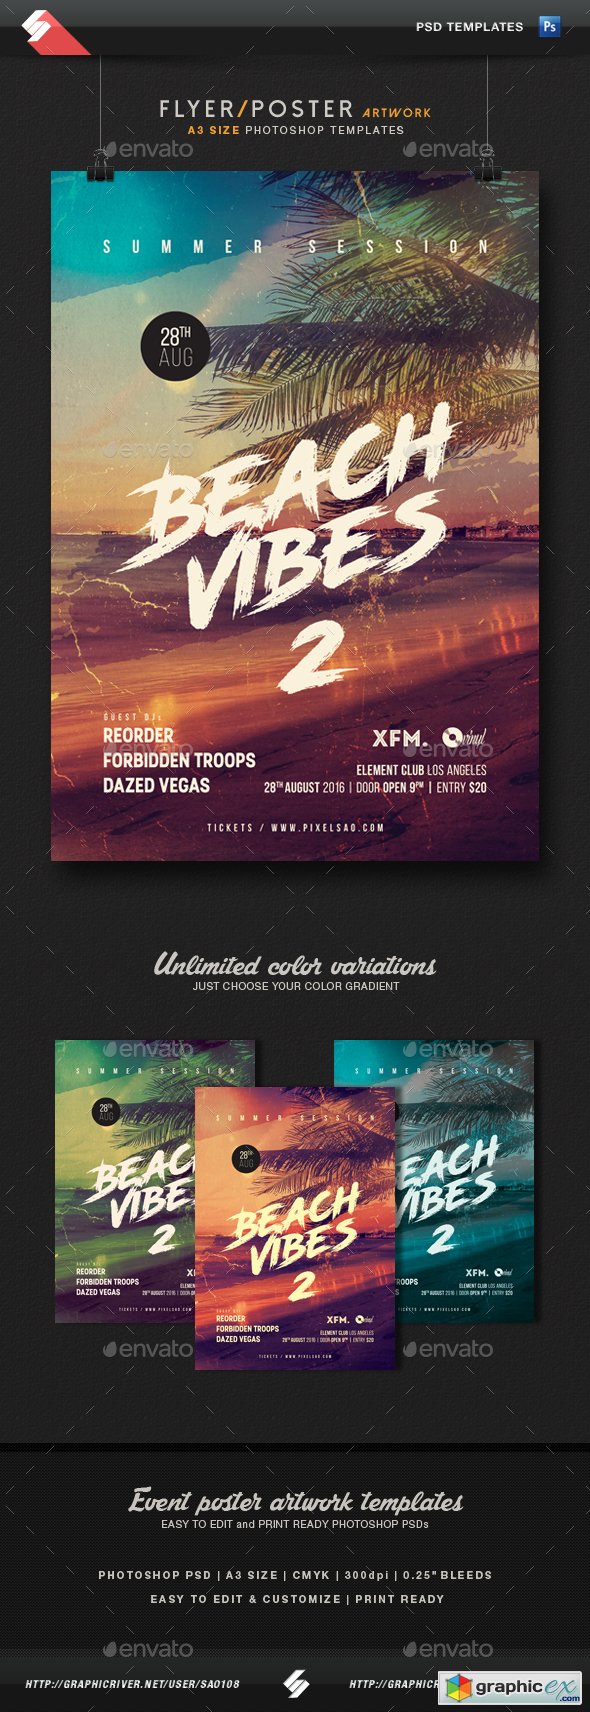 Beach Vibes 2 - Summer Party Flyer / Poster Template A3